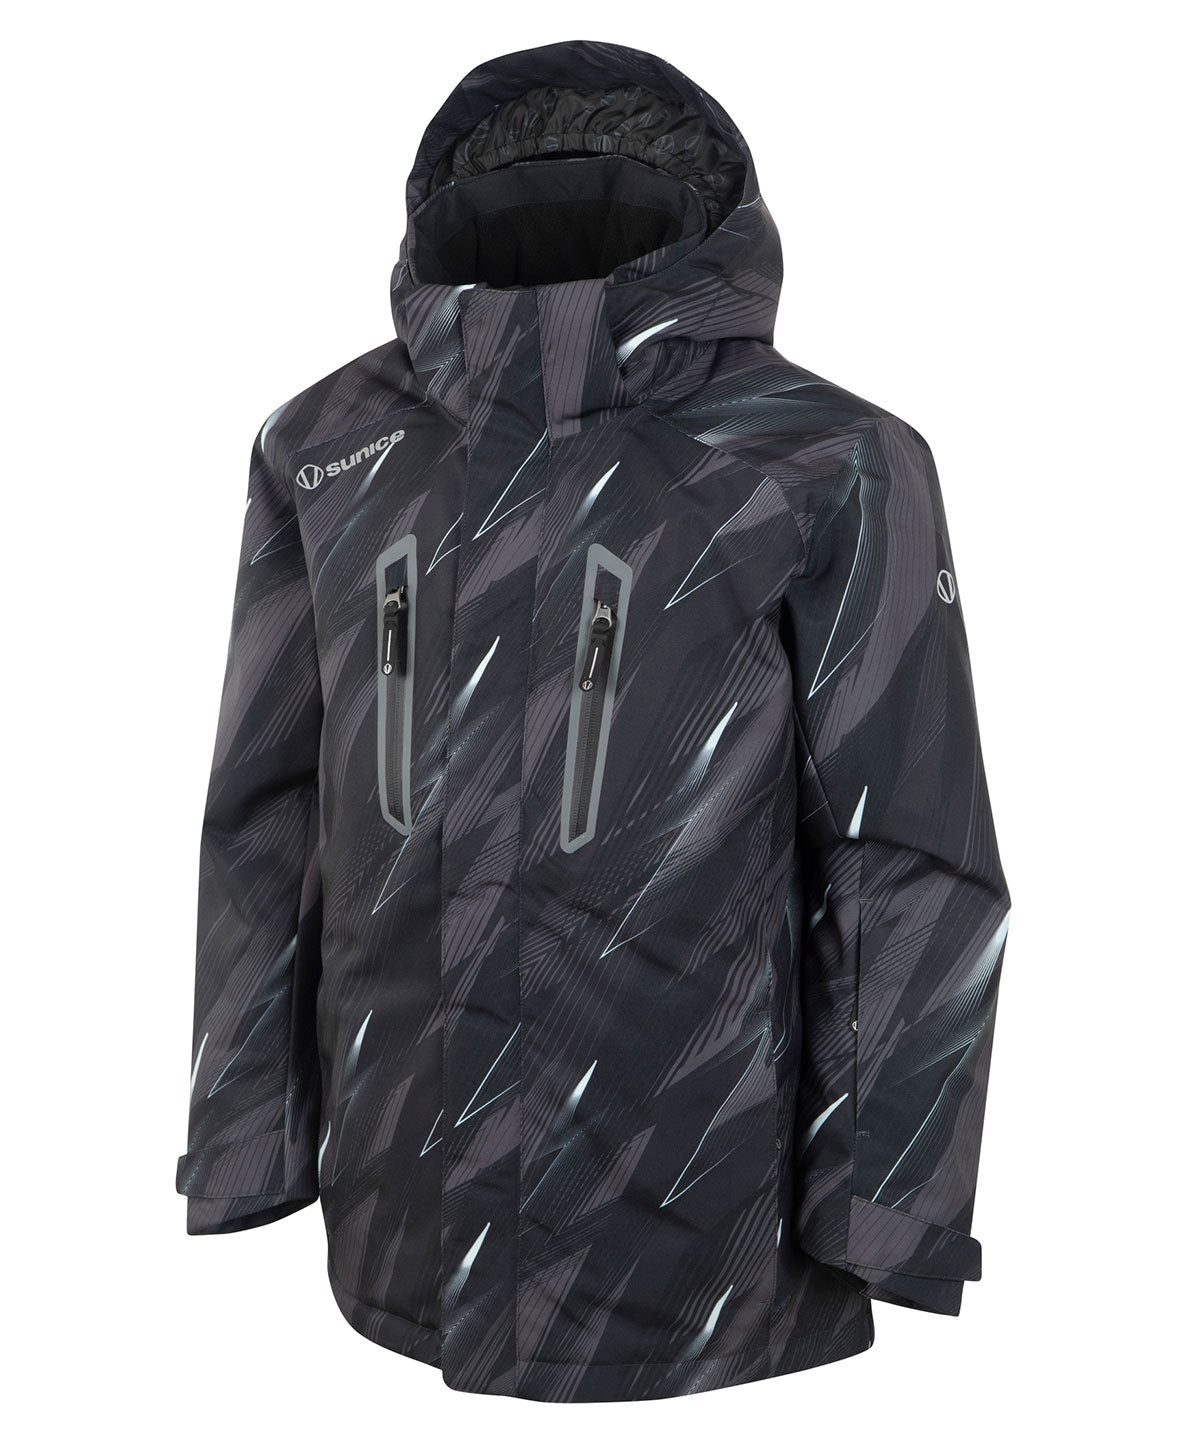 Boys' Reign Waterproof Insulated Stretch Jacket